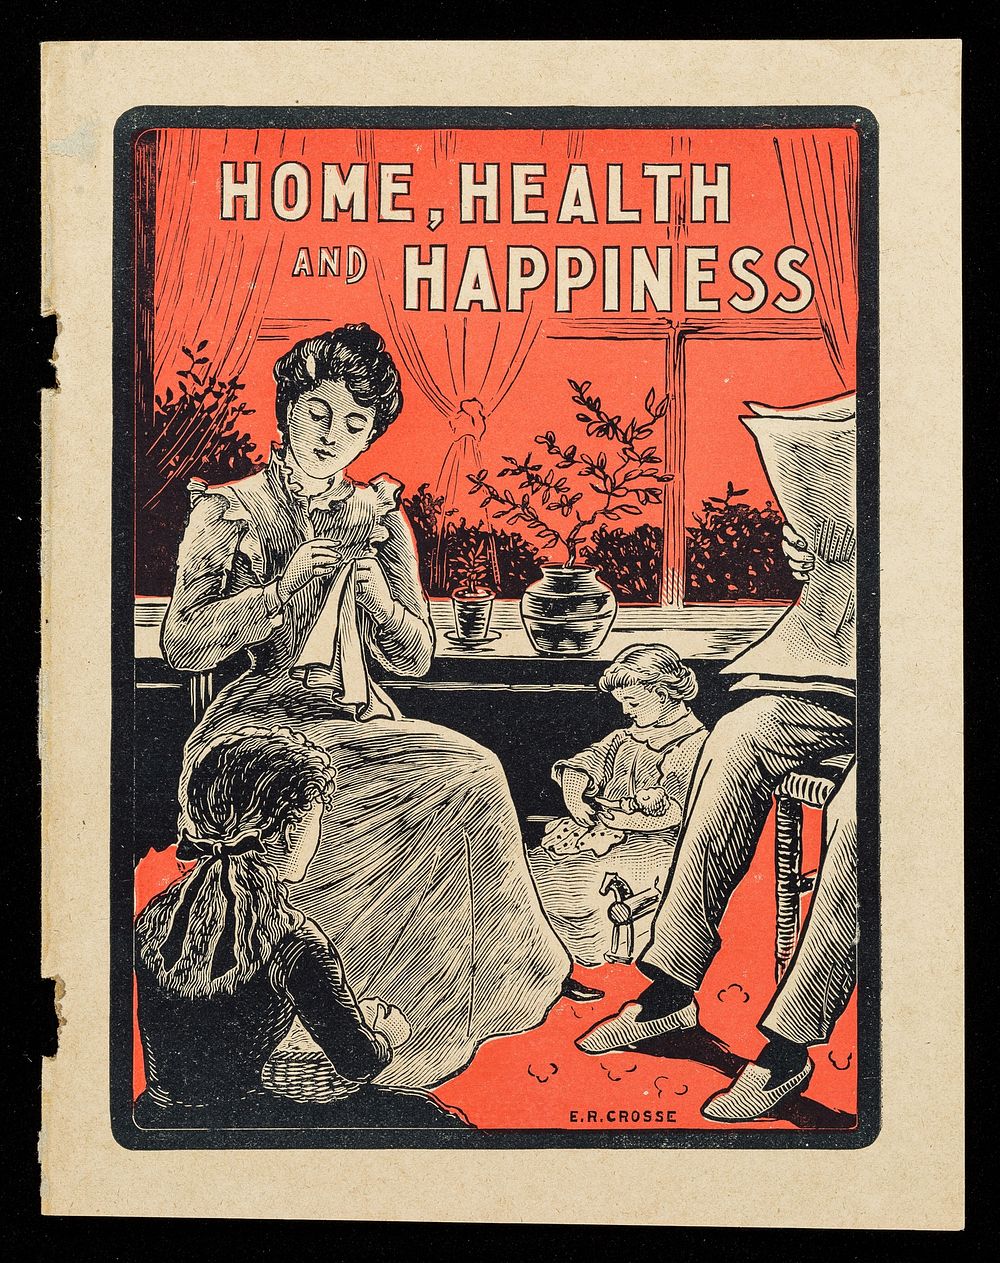 Home, health and happiness / Bile Bean Manufacturing Co.